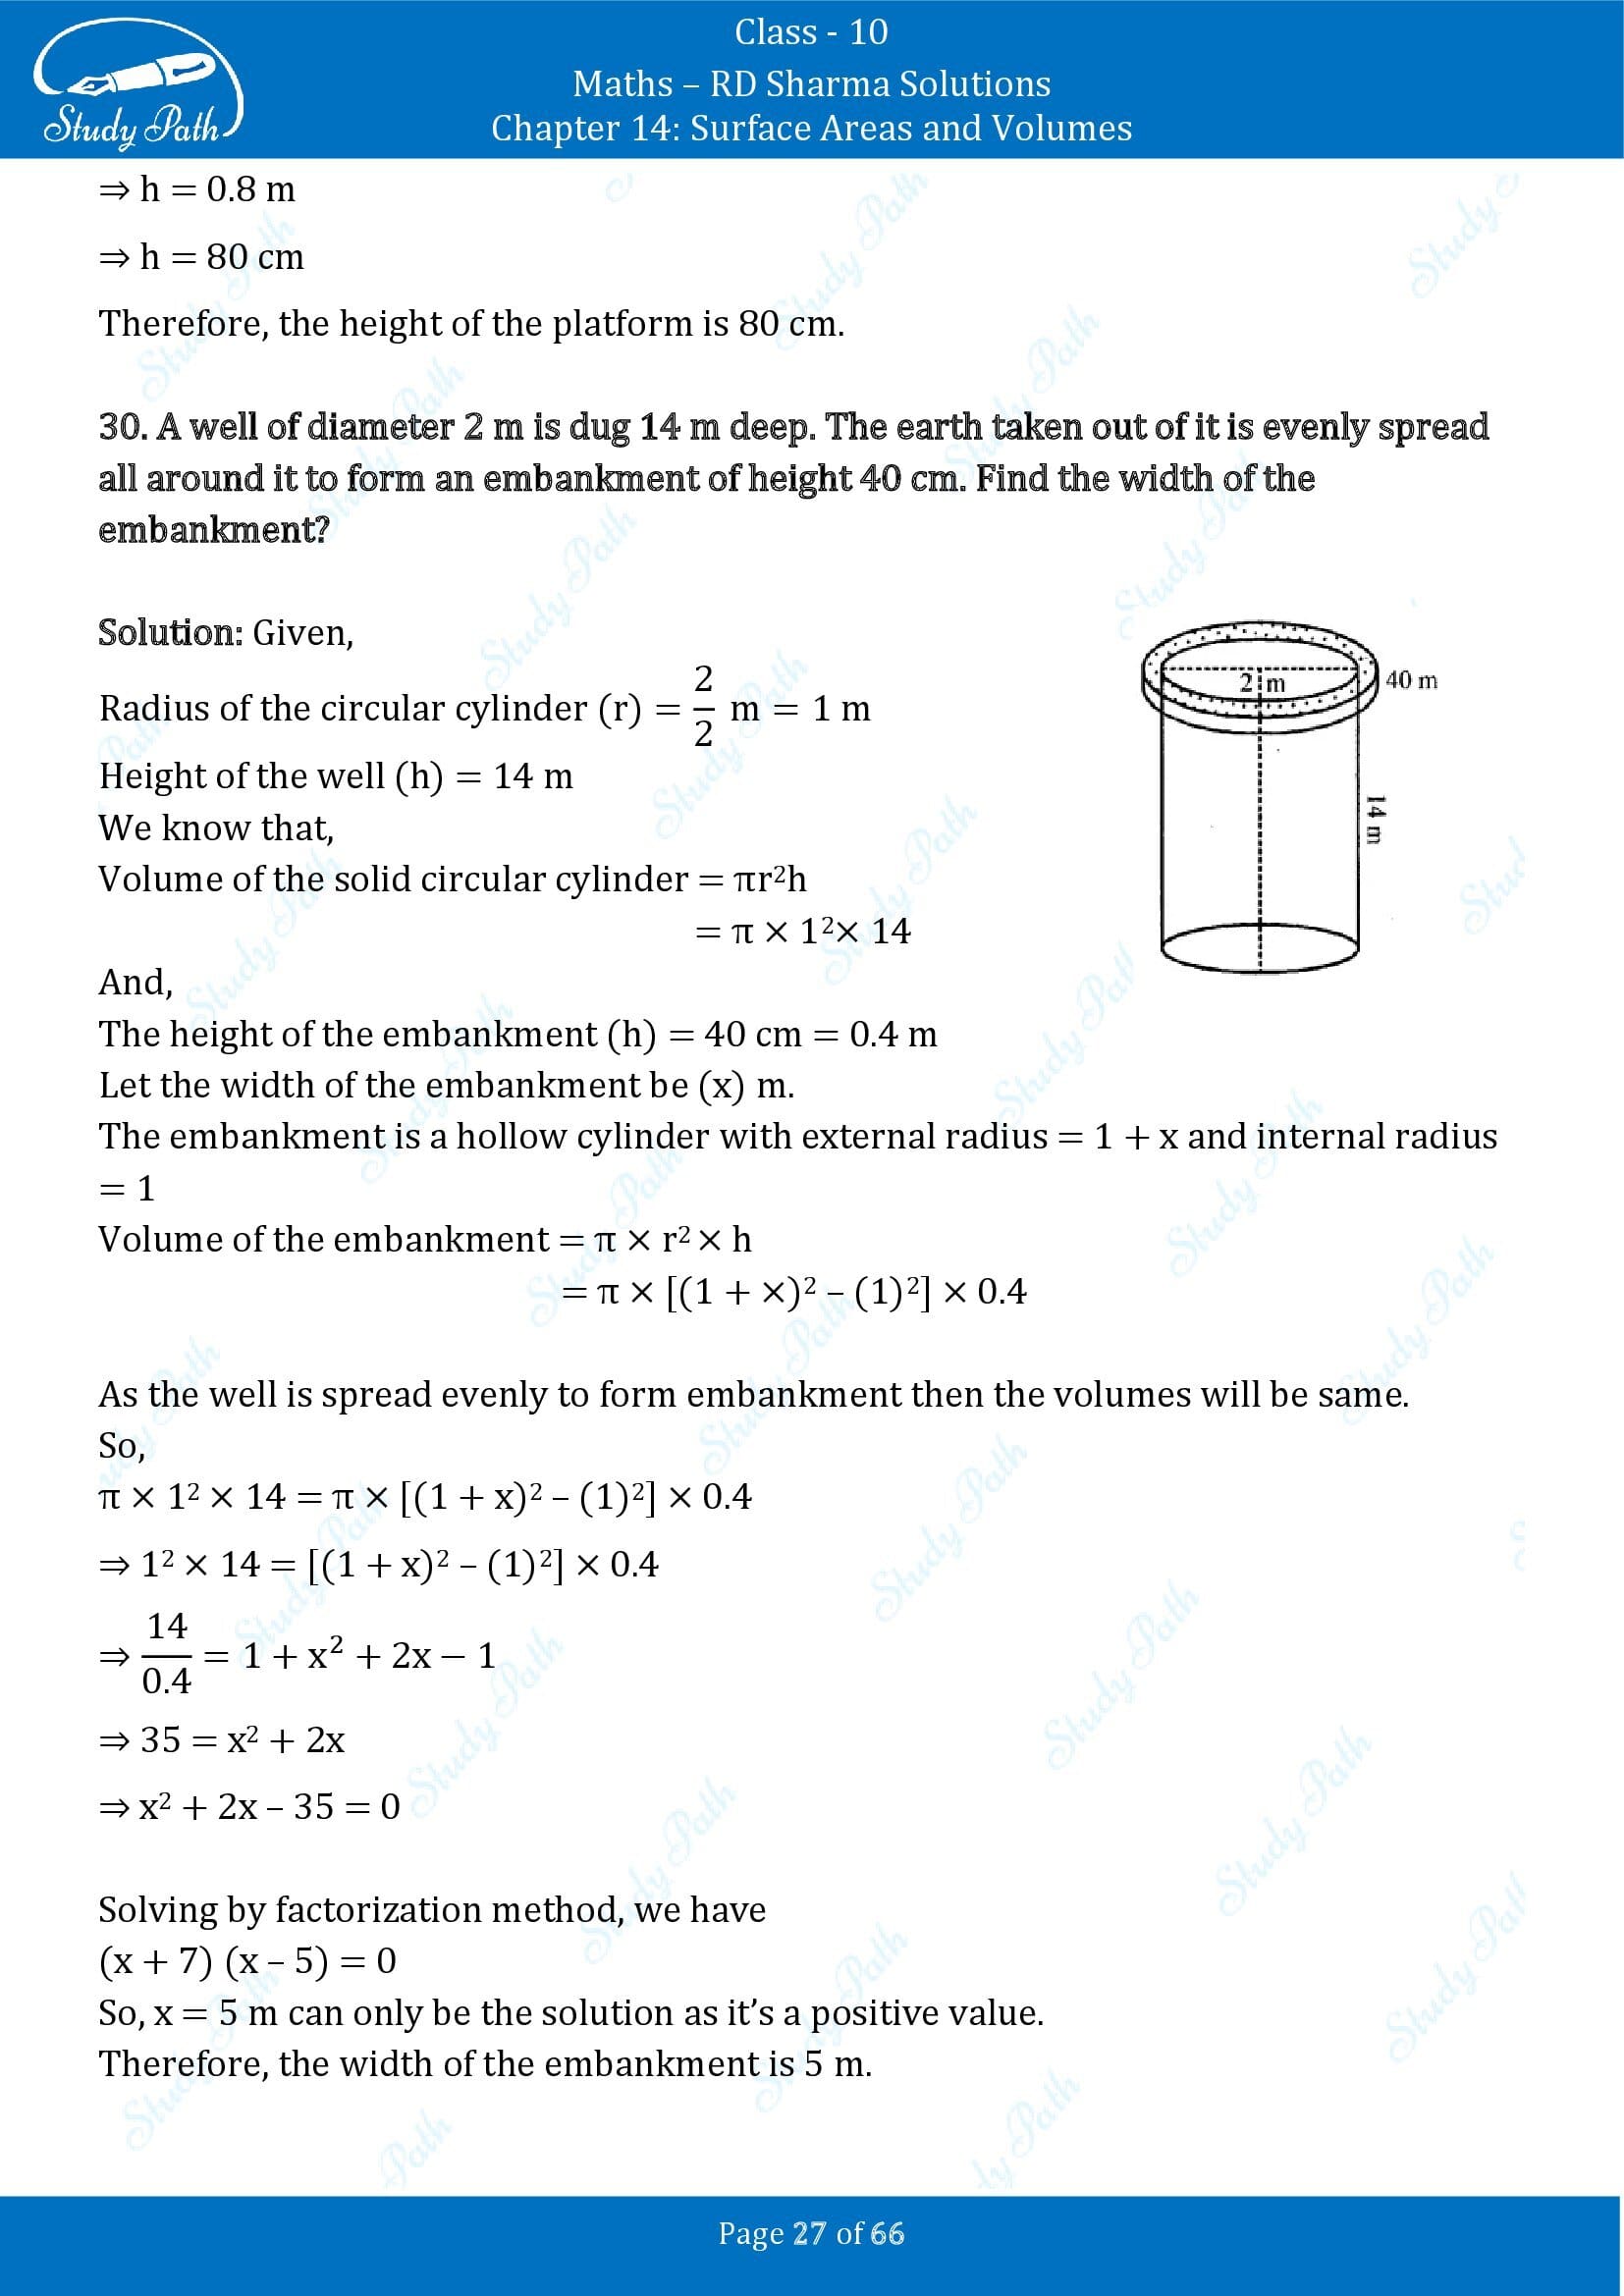 RD Sharma Solutions Class 10 Chapter 14 Surface Areas and Volumes Exercise 14.1 00027